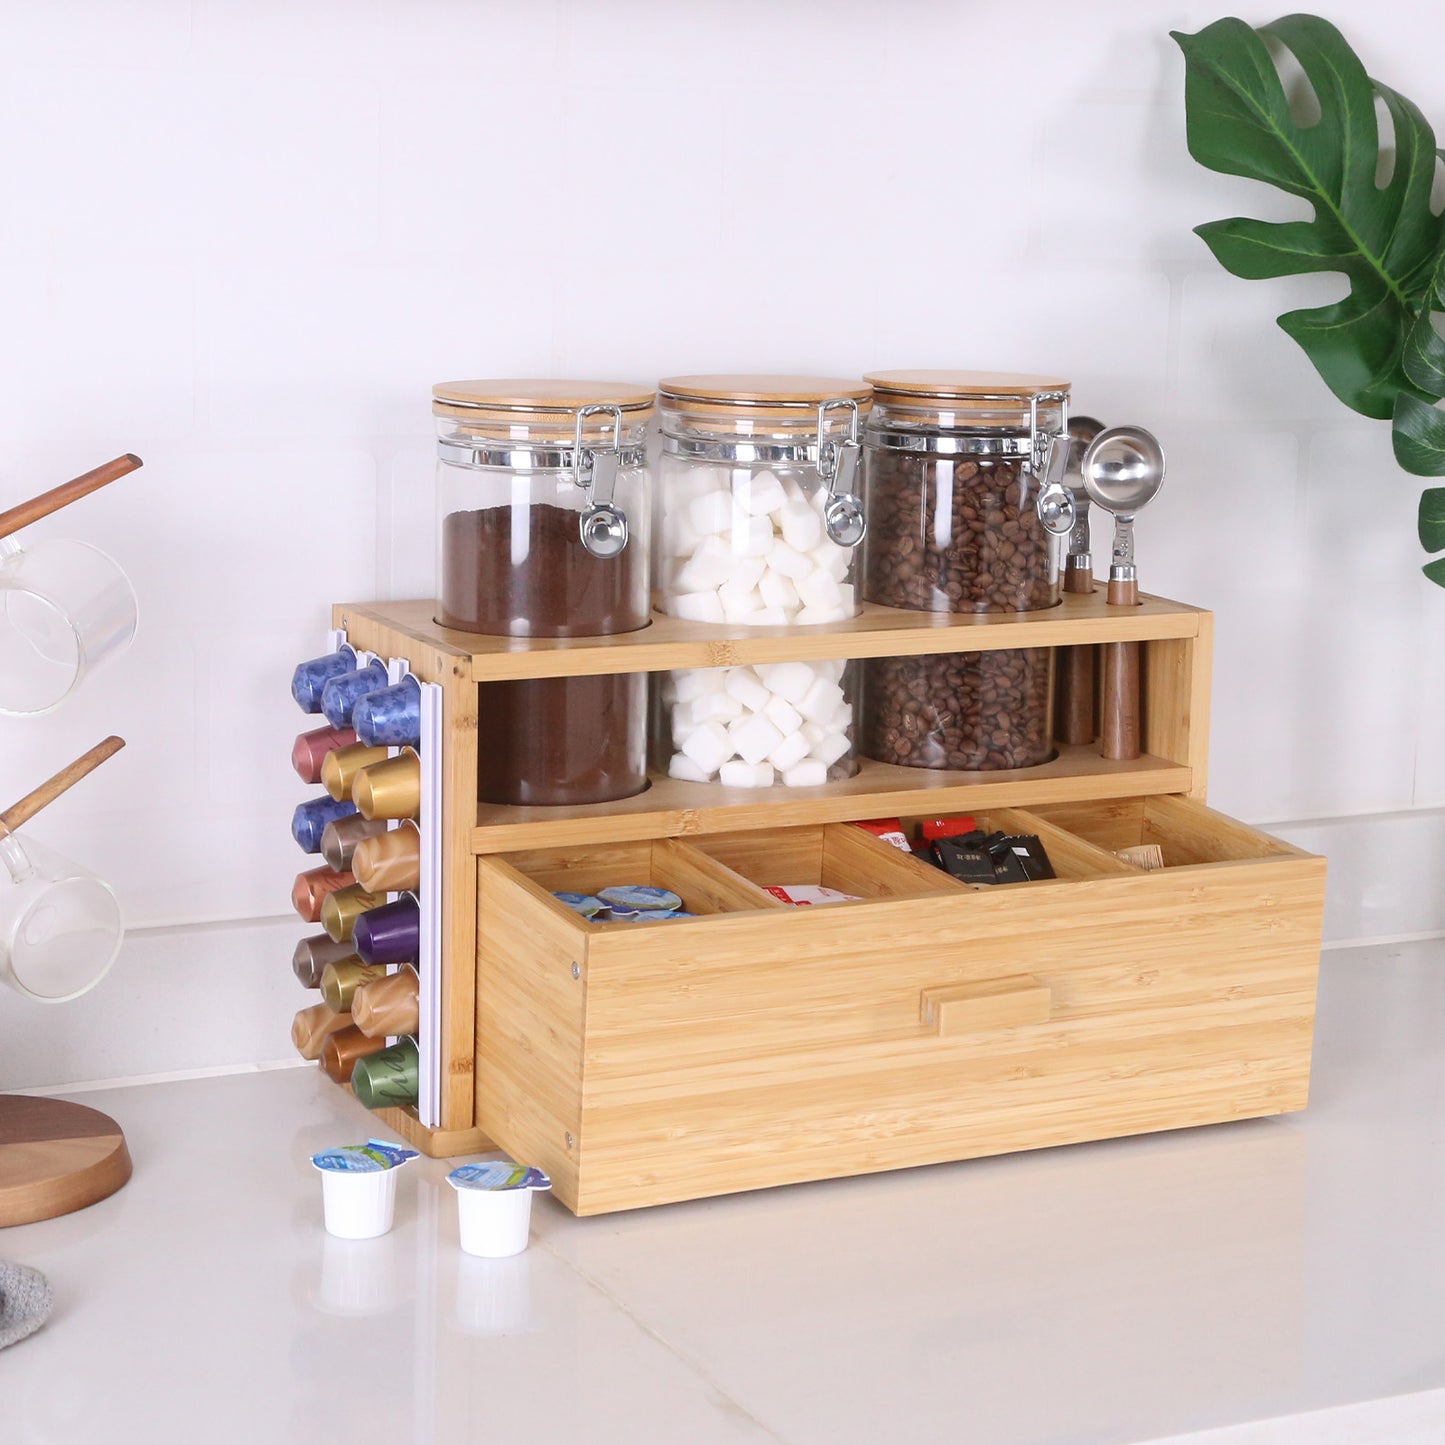 KKC Coffee Station Organizer, K Cup Coffee Pods Holder with Drawer, Countertop Coffee Bar Accessories Organizer, Coffee Pod Holder Storage Basket, for Coffee Capsule Pod, Sugar, Straw.